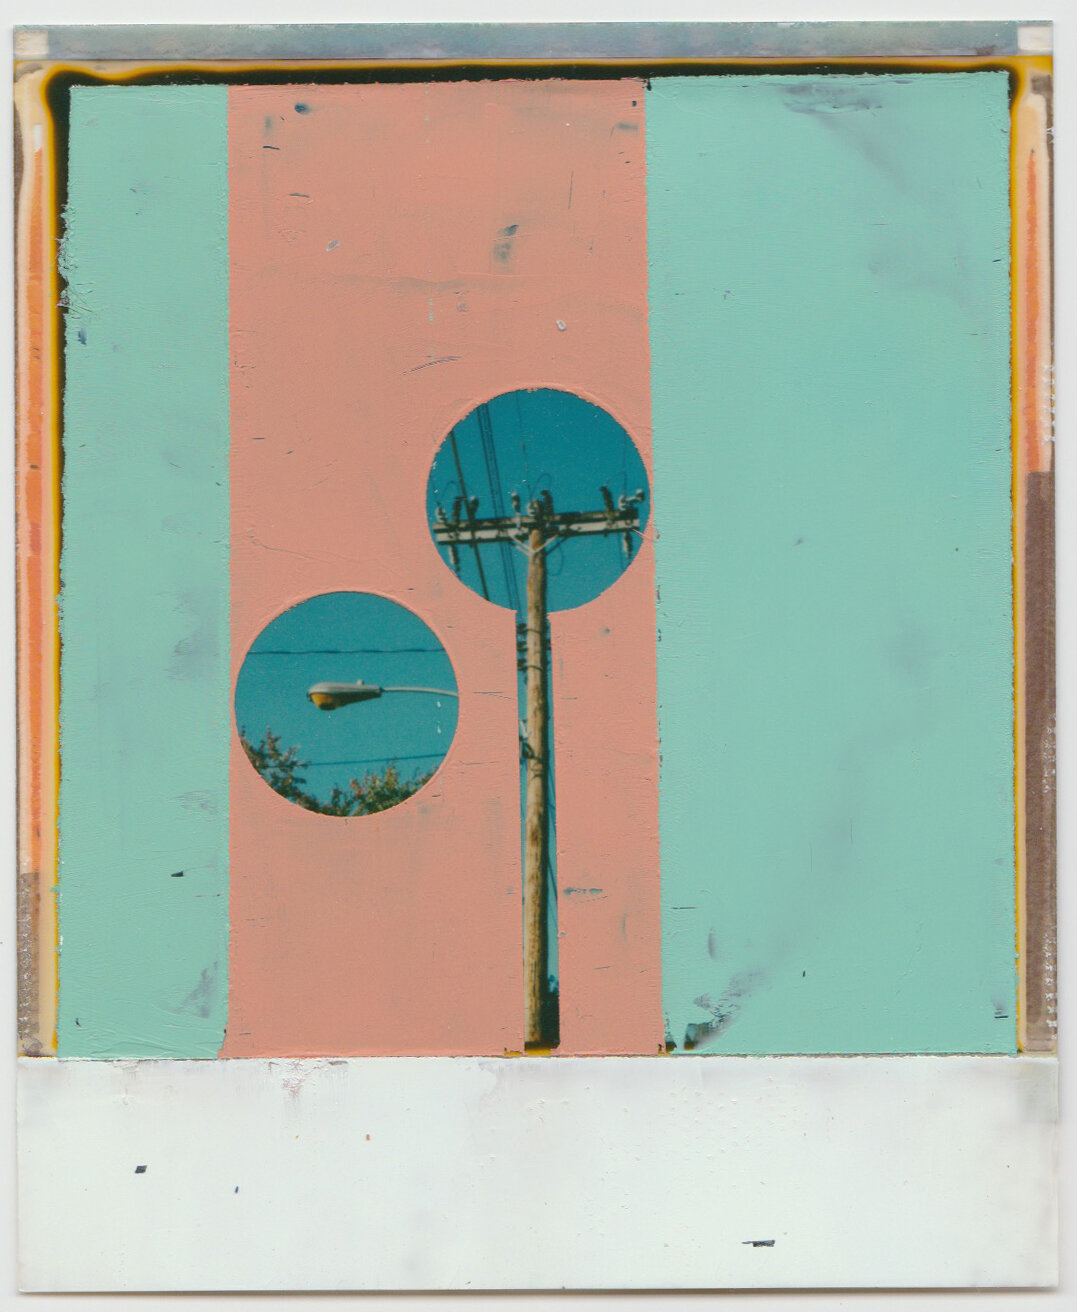   INTERSECTION (SEPERATION ANXIETY)   oil on sx-70 Polaroid | 3.25" x 4.25" | 2019 